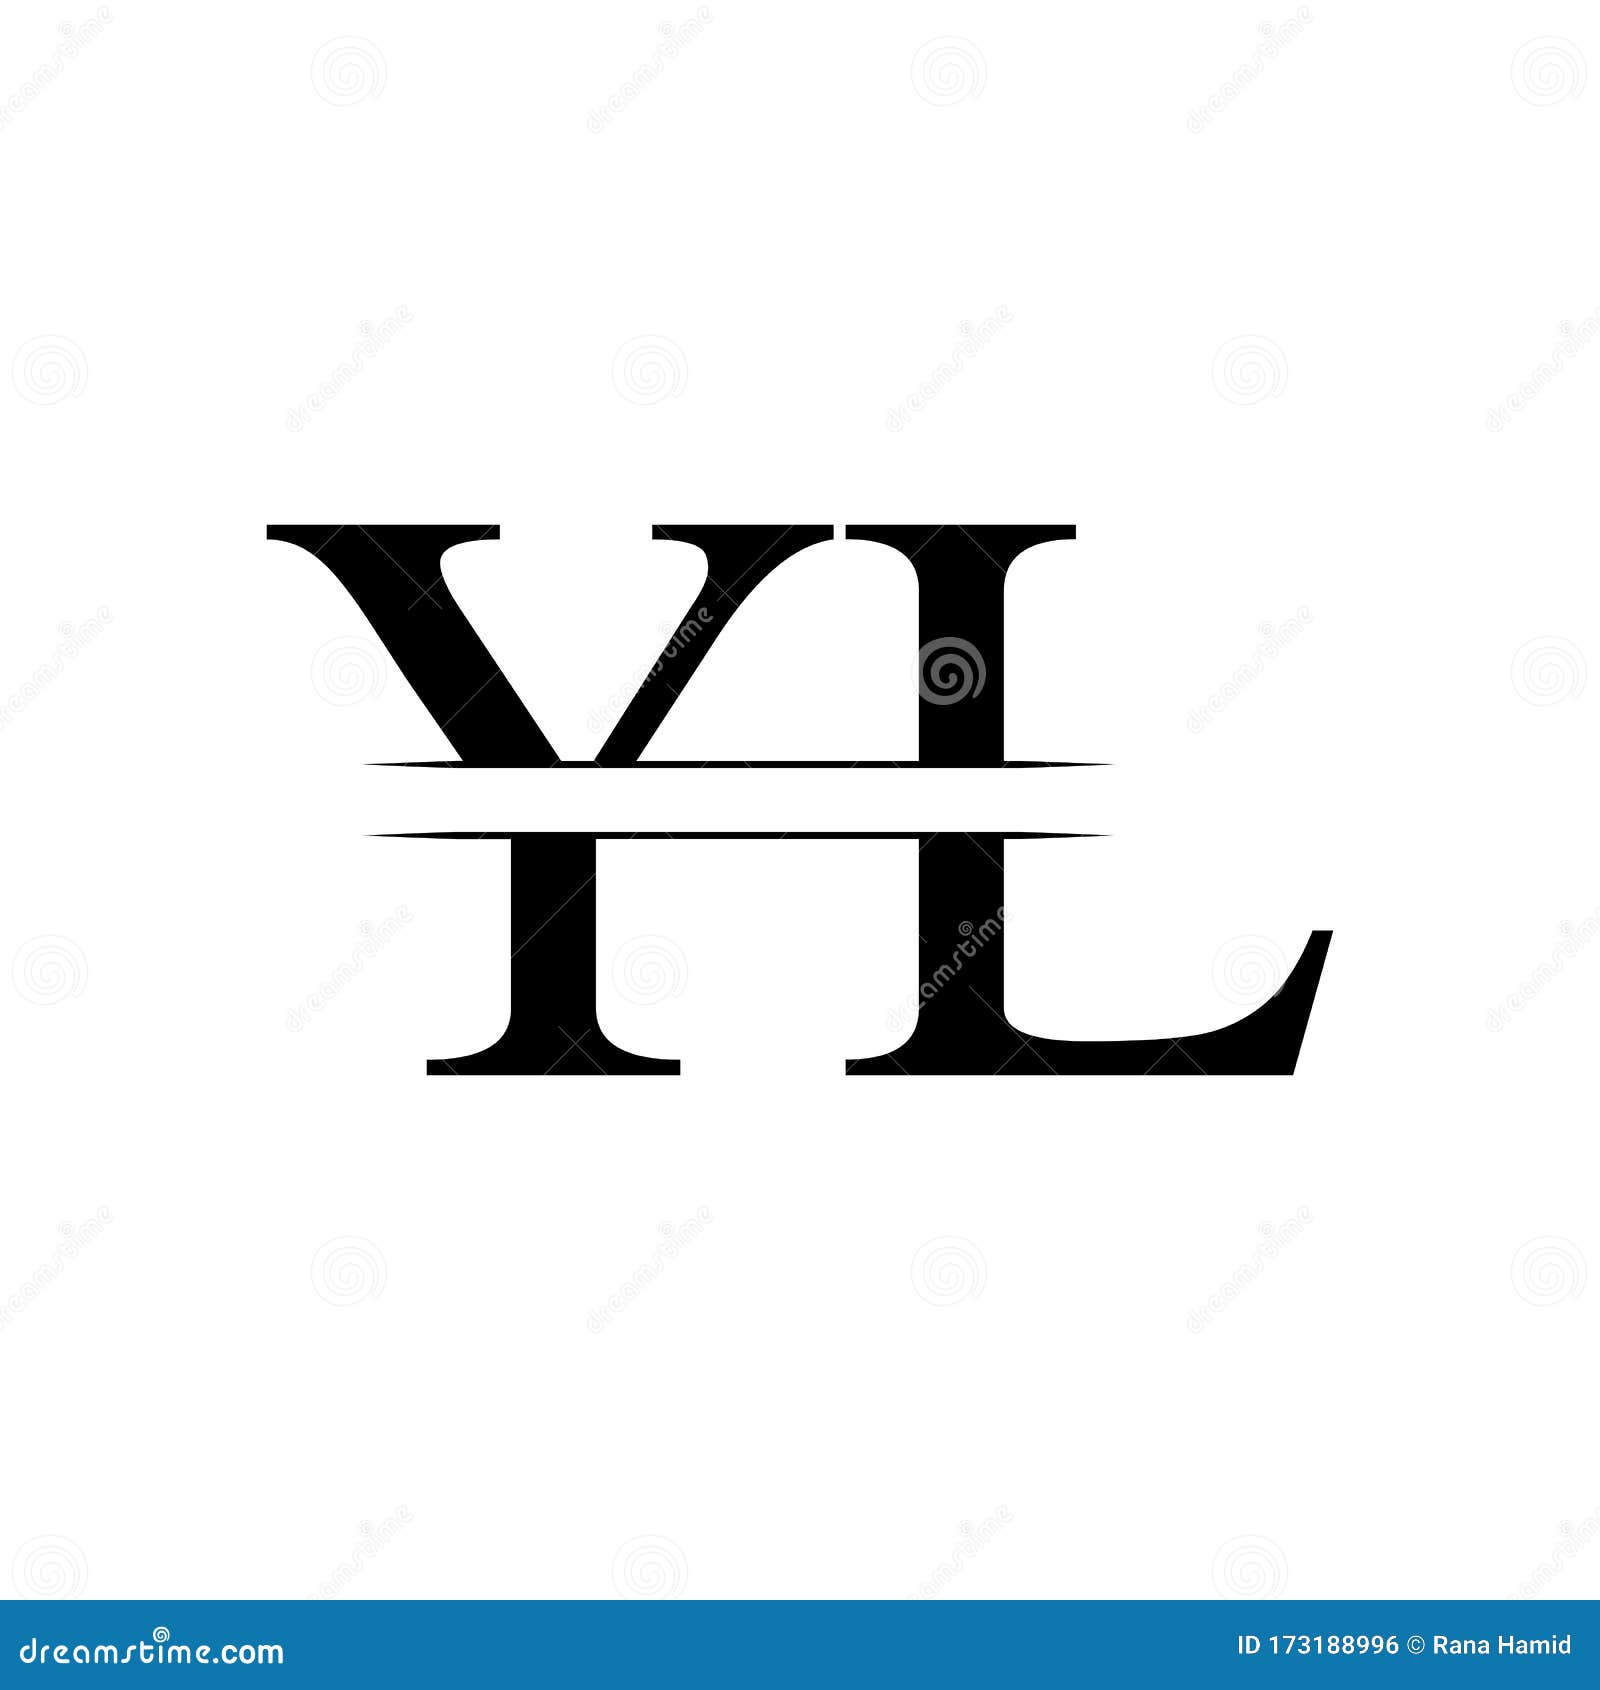 Yl y l black and yellow letter logo with swoosh Vector Image